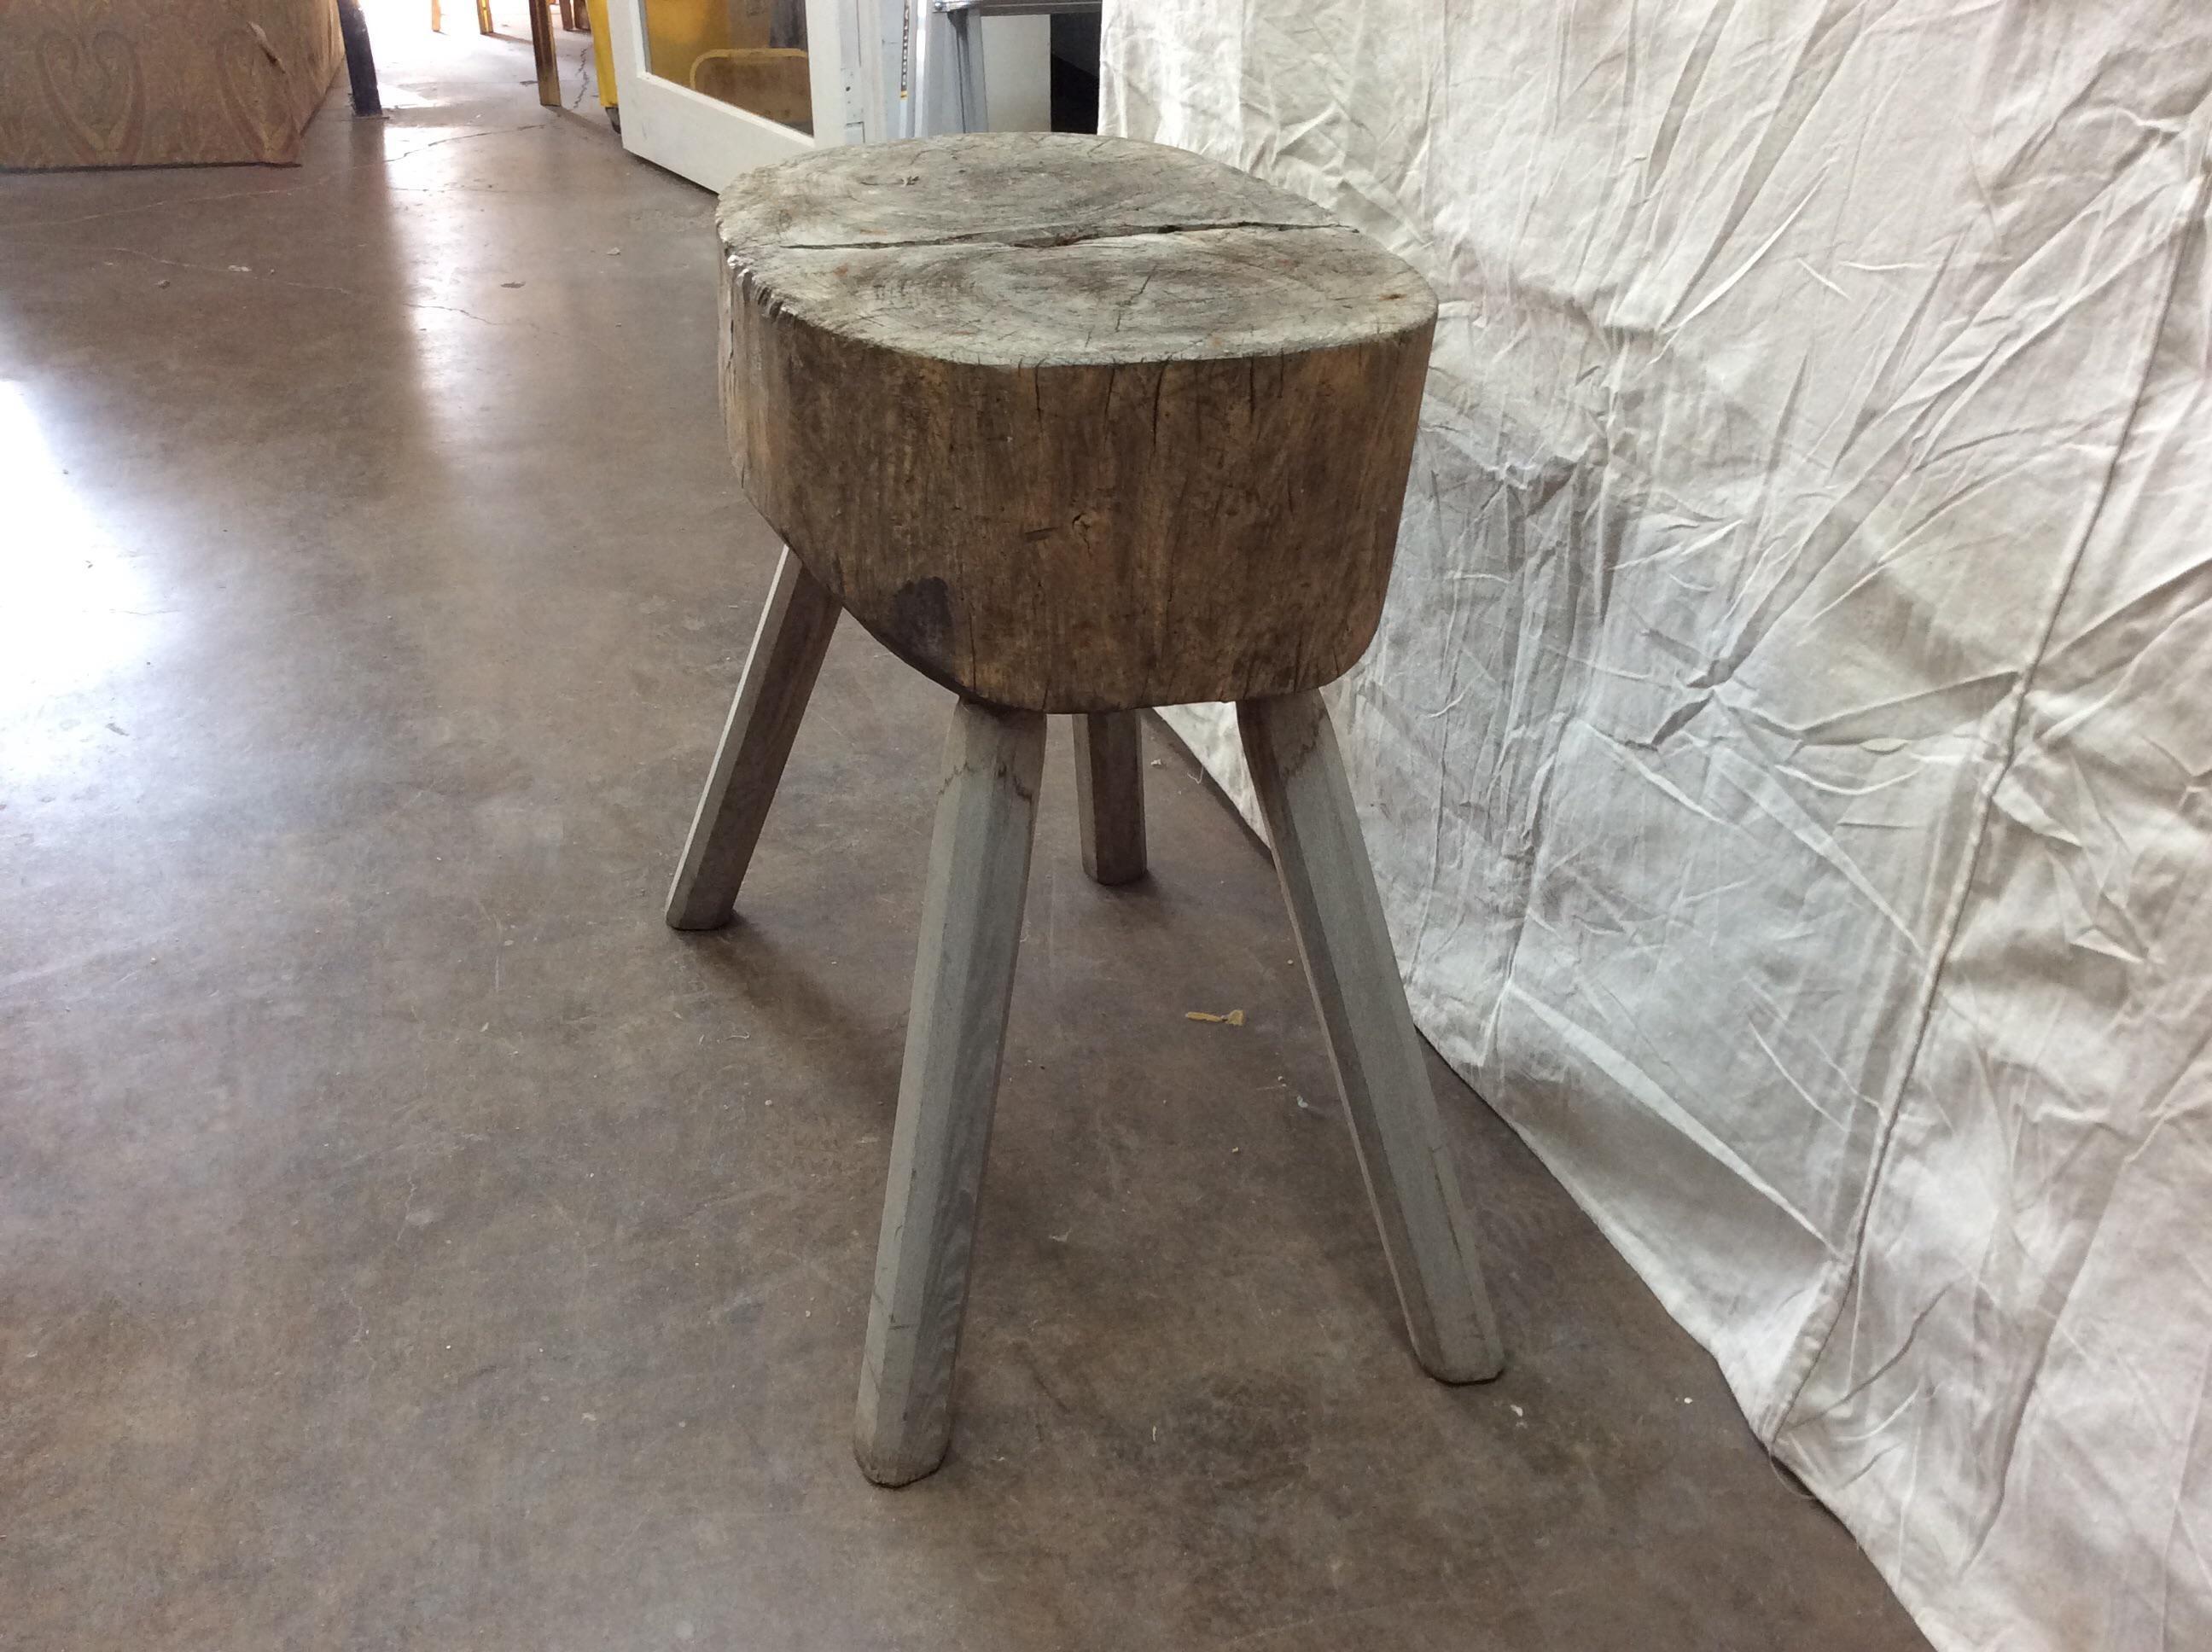 Found in Provence, this rustic French Butcher Table was probably used in an outdoor market or on a farm. Handmade from a single tree trunk the butcher block stands on four legs. A unique accent table, this will surely be a conversation